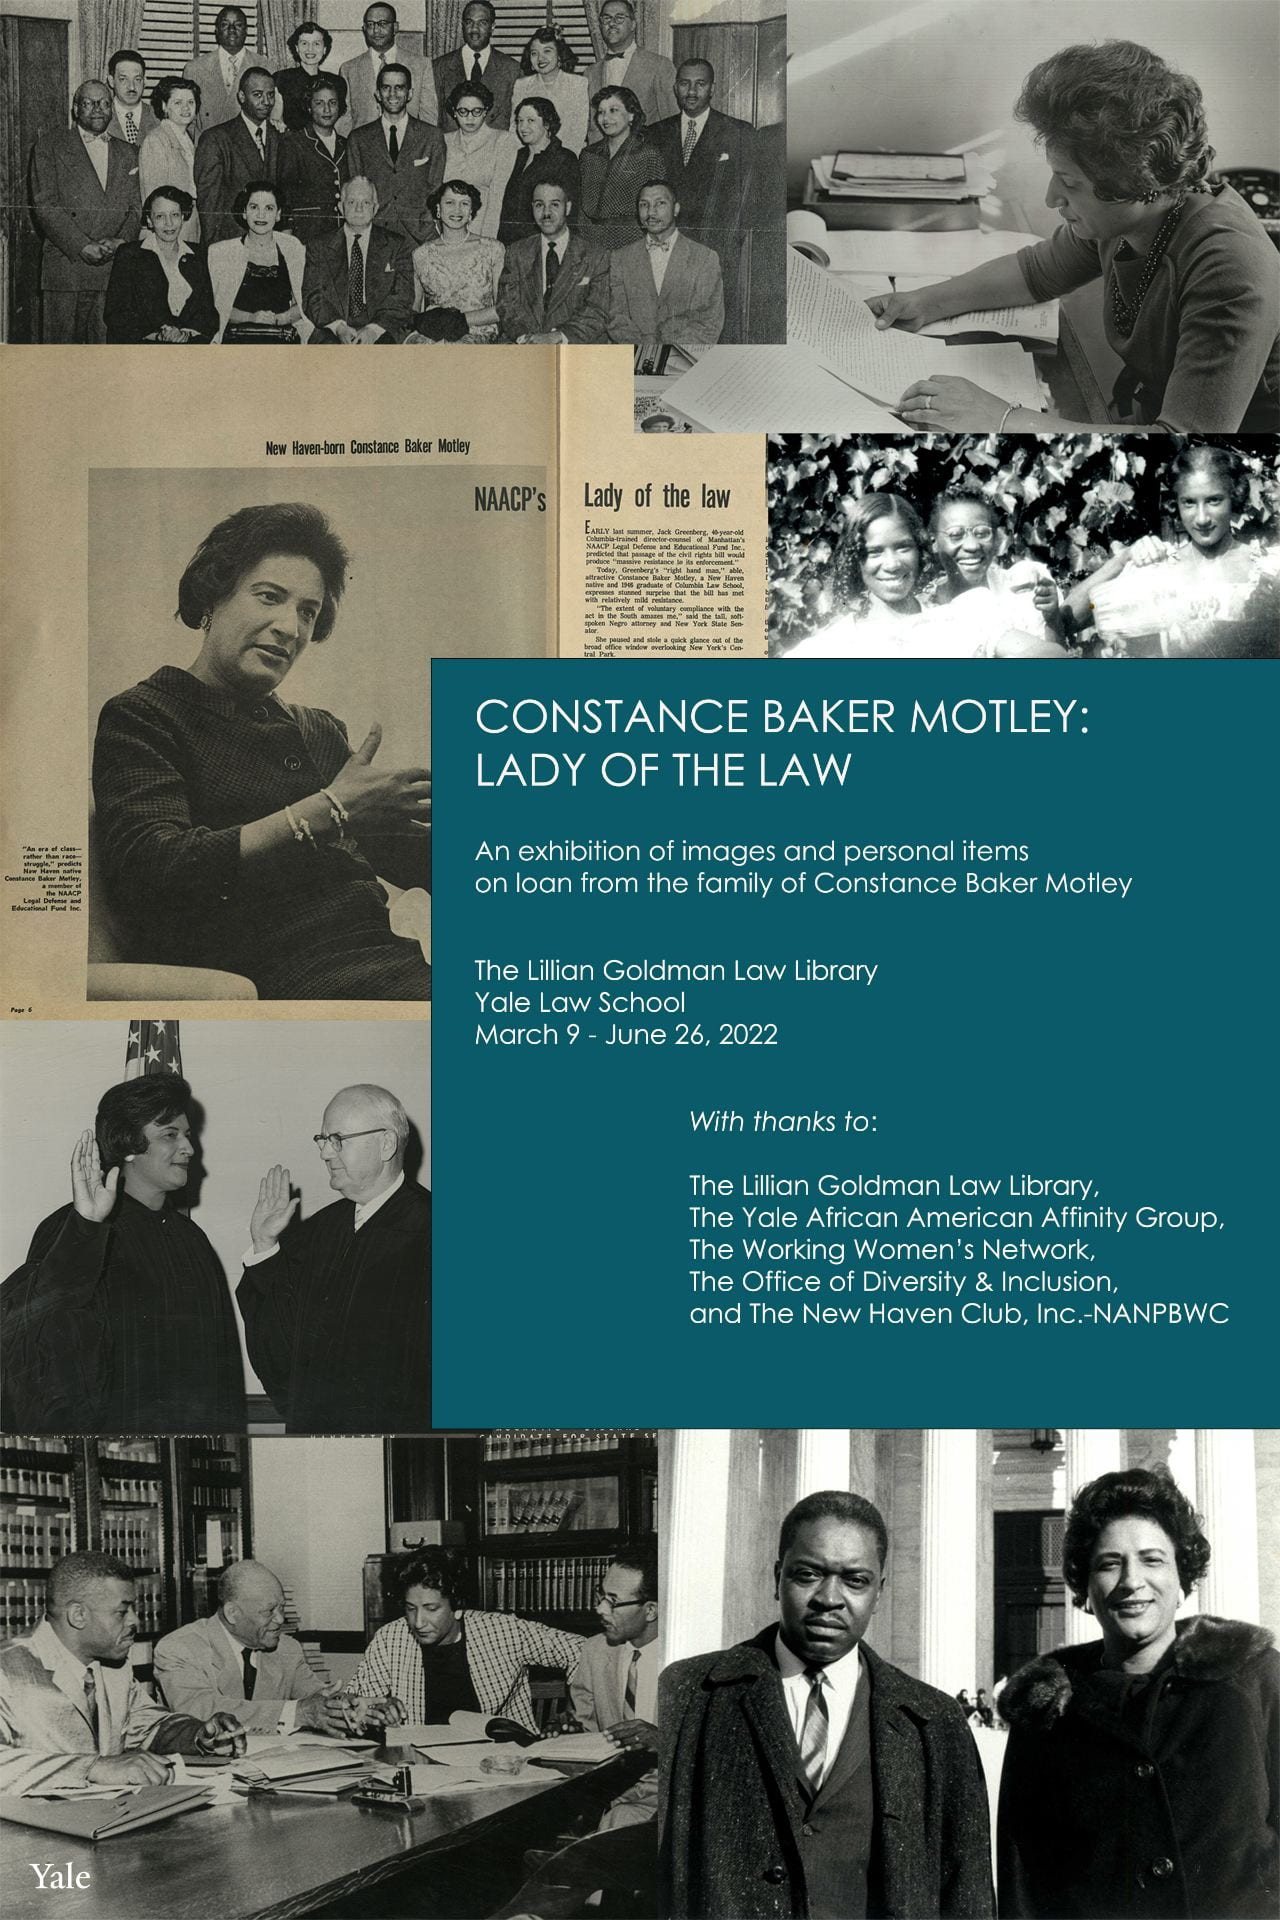 Exhibition poster showing photographs of Constance Baker Motley